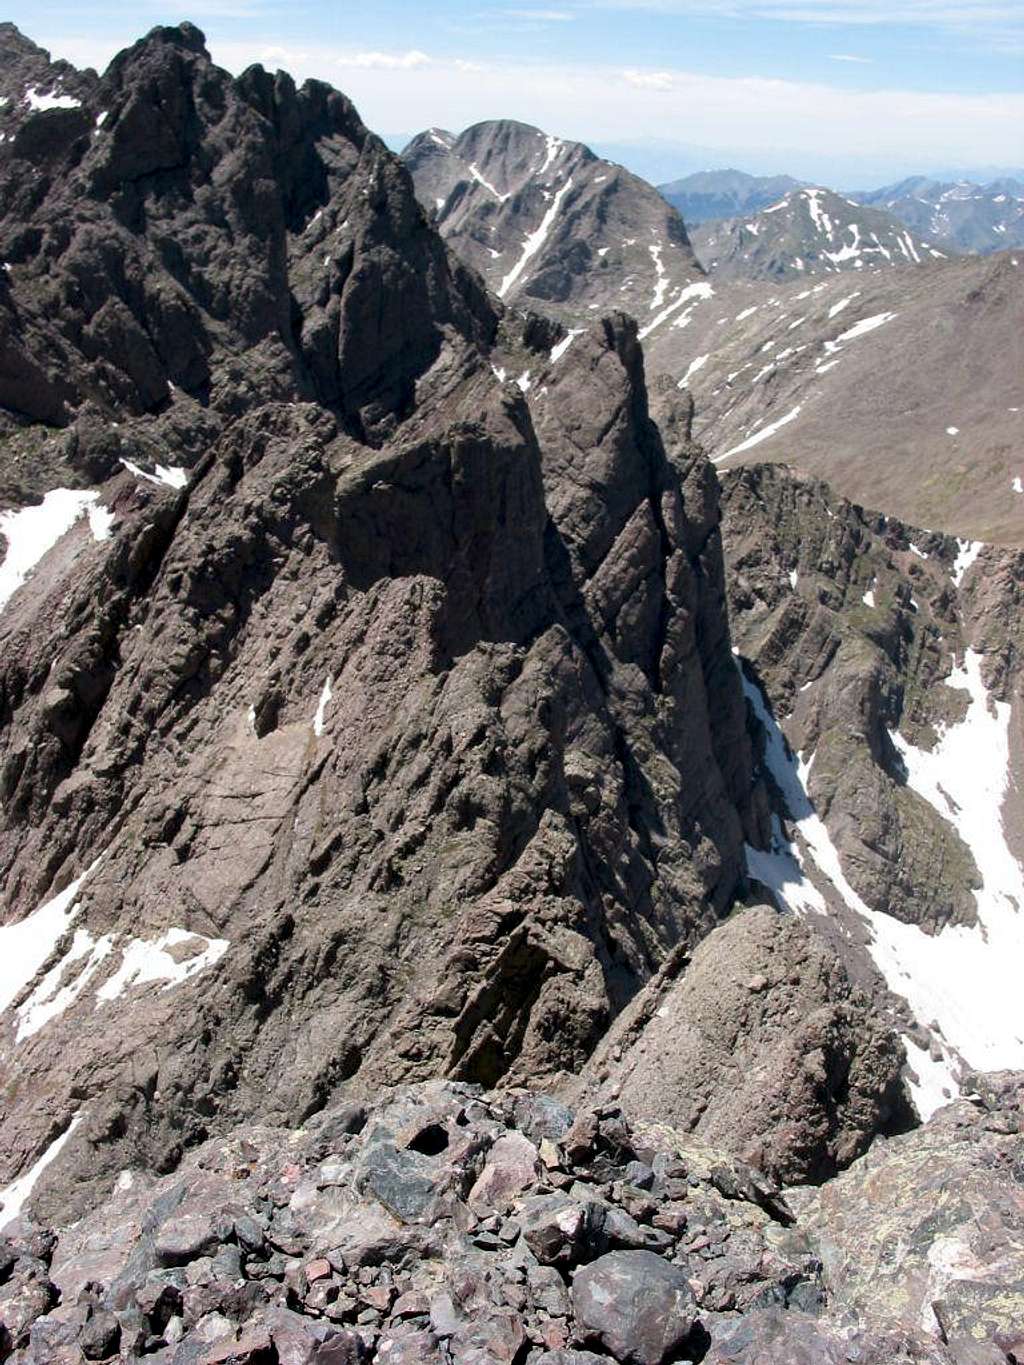 Part of the Traverse